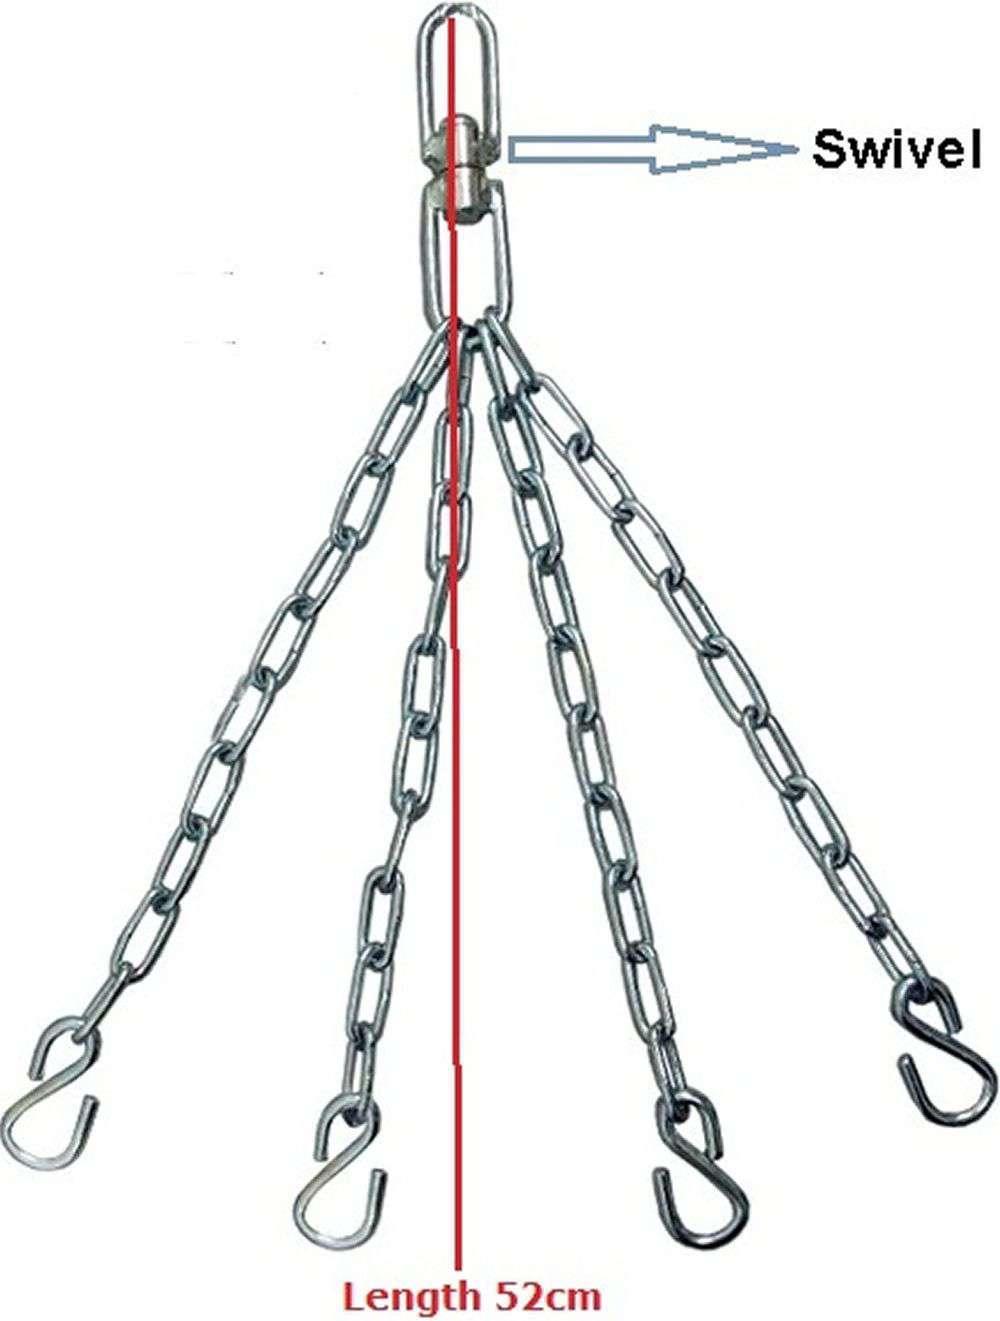 RDX X14 PUNCH BAG CHAINS - Fitness Health 